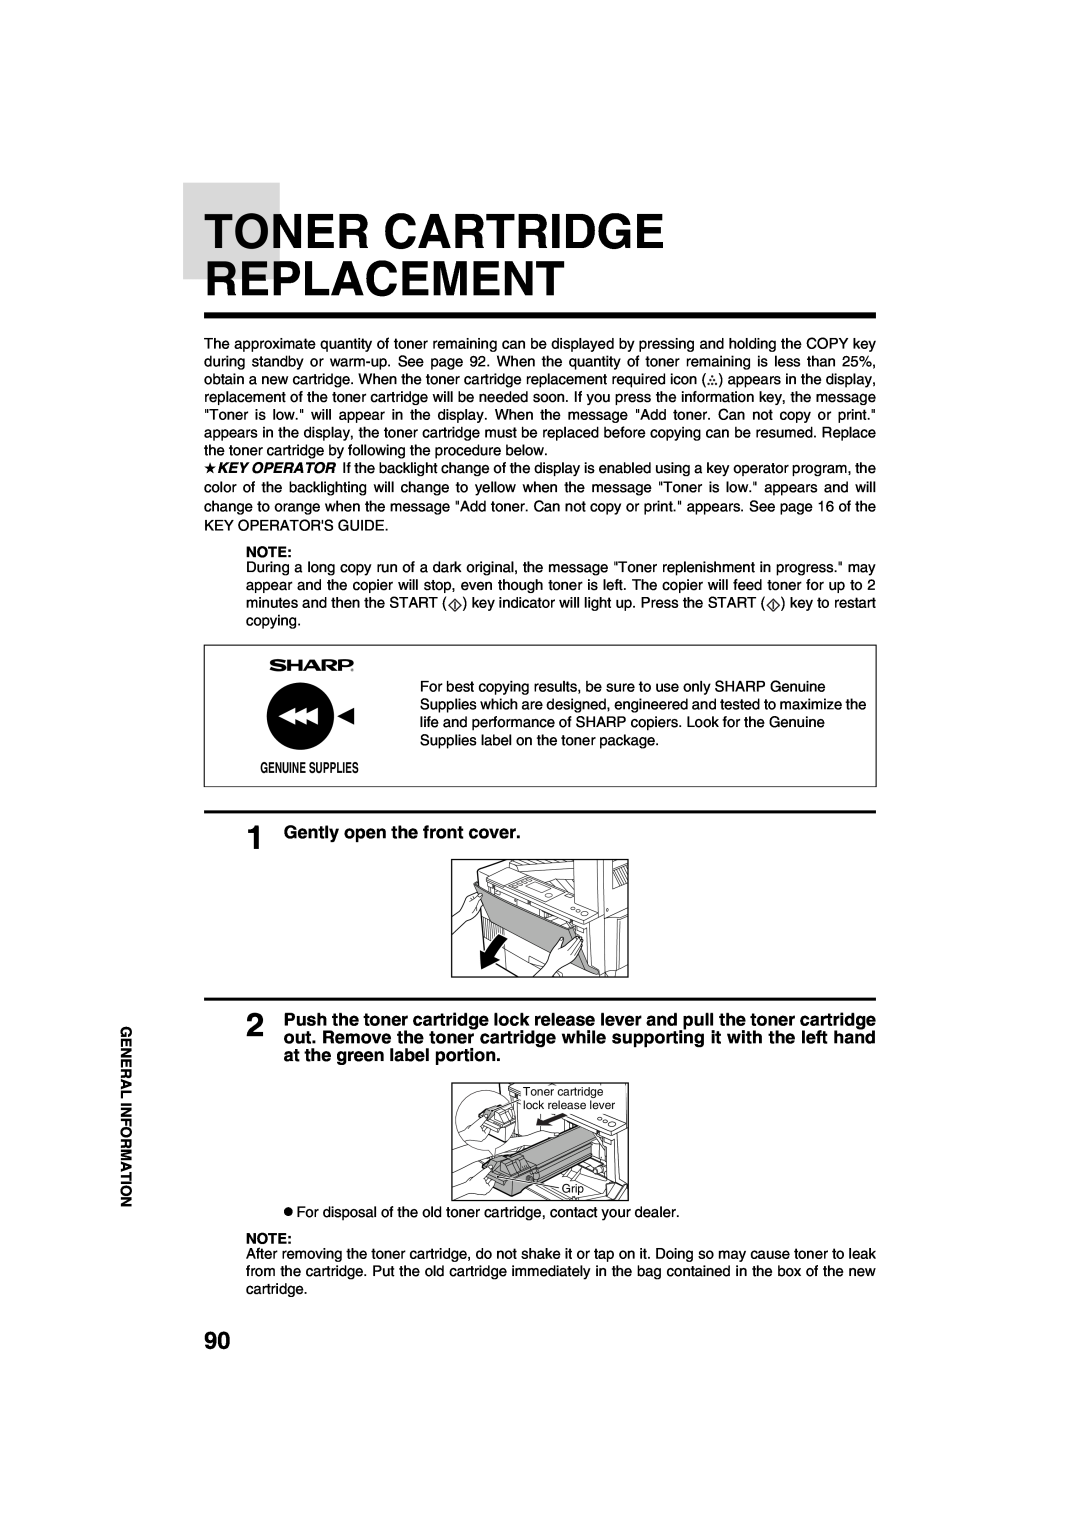 Sharp AR-M208 operation manual Toner Cartridge Replacement, Gently open the front cover, at the green label portion 